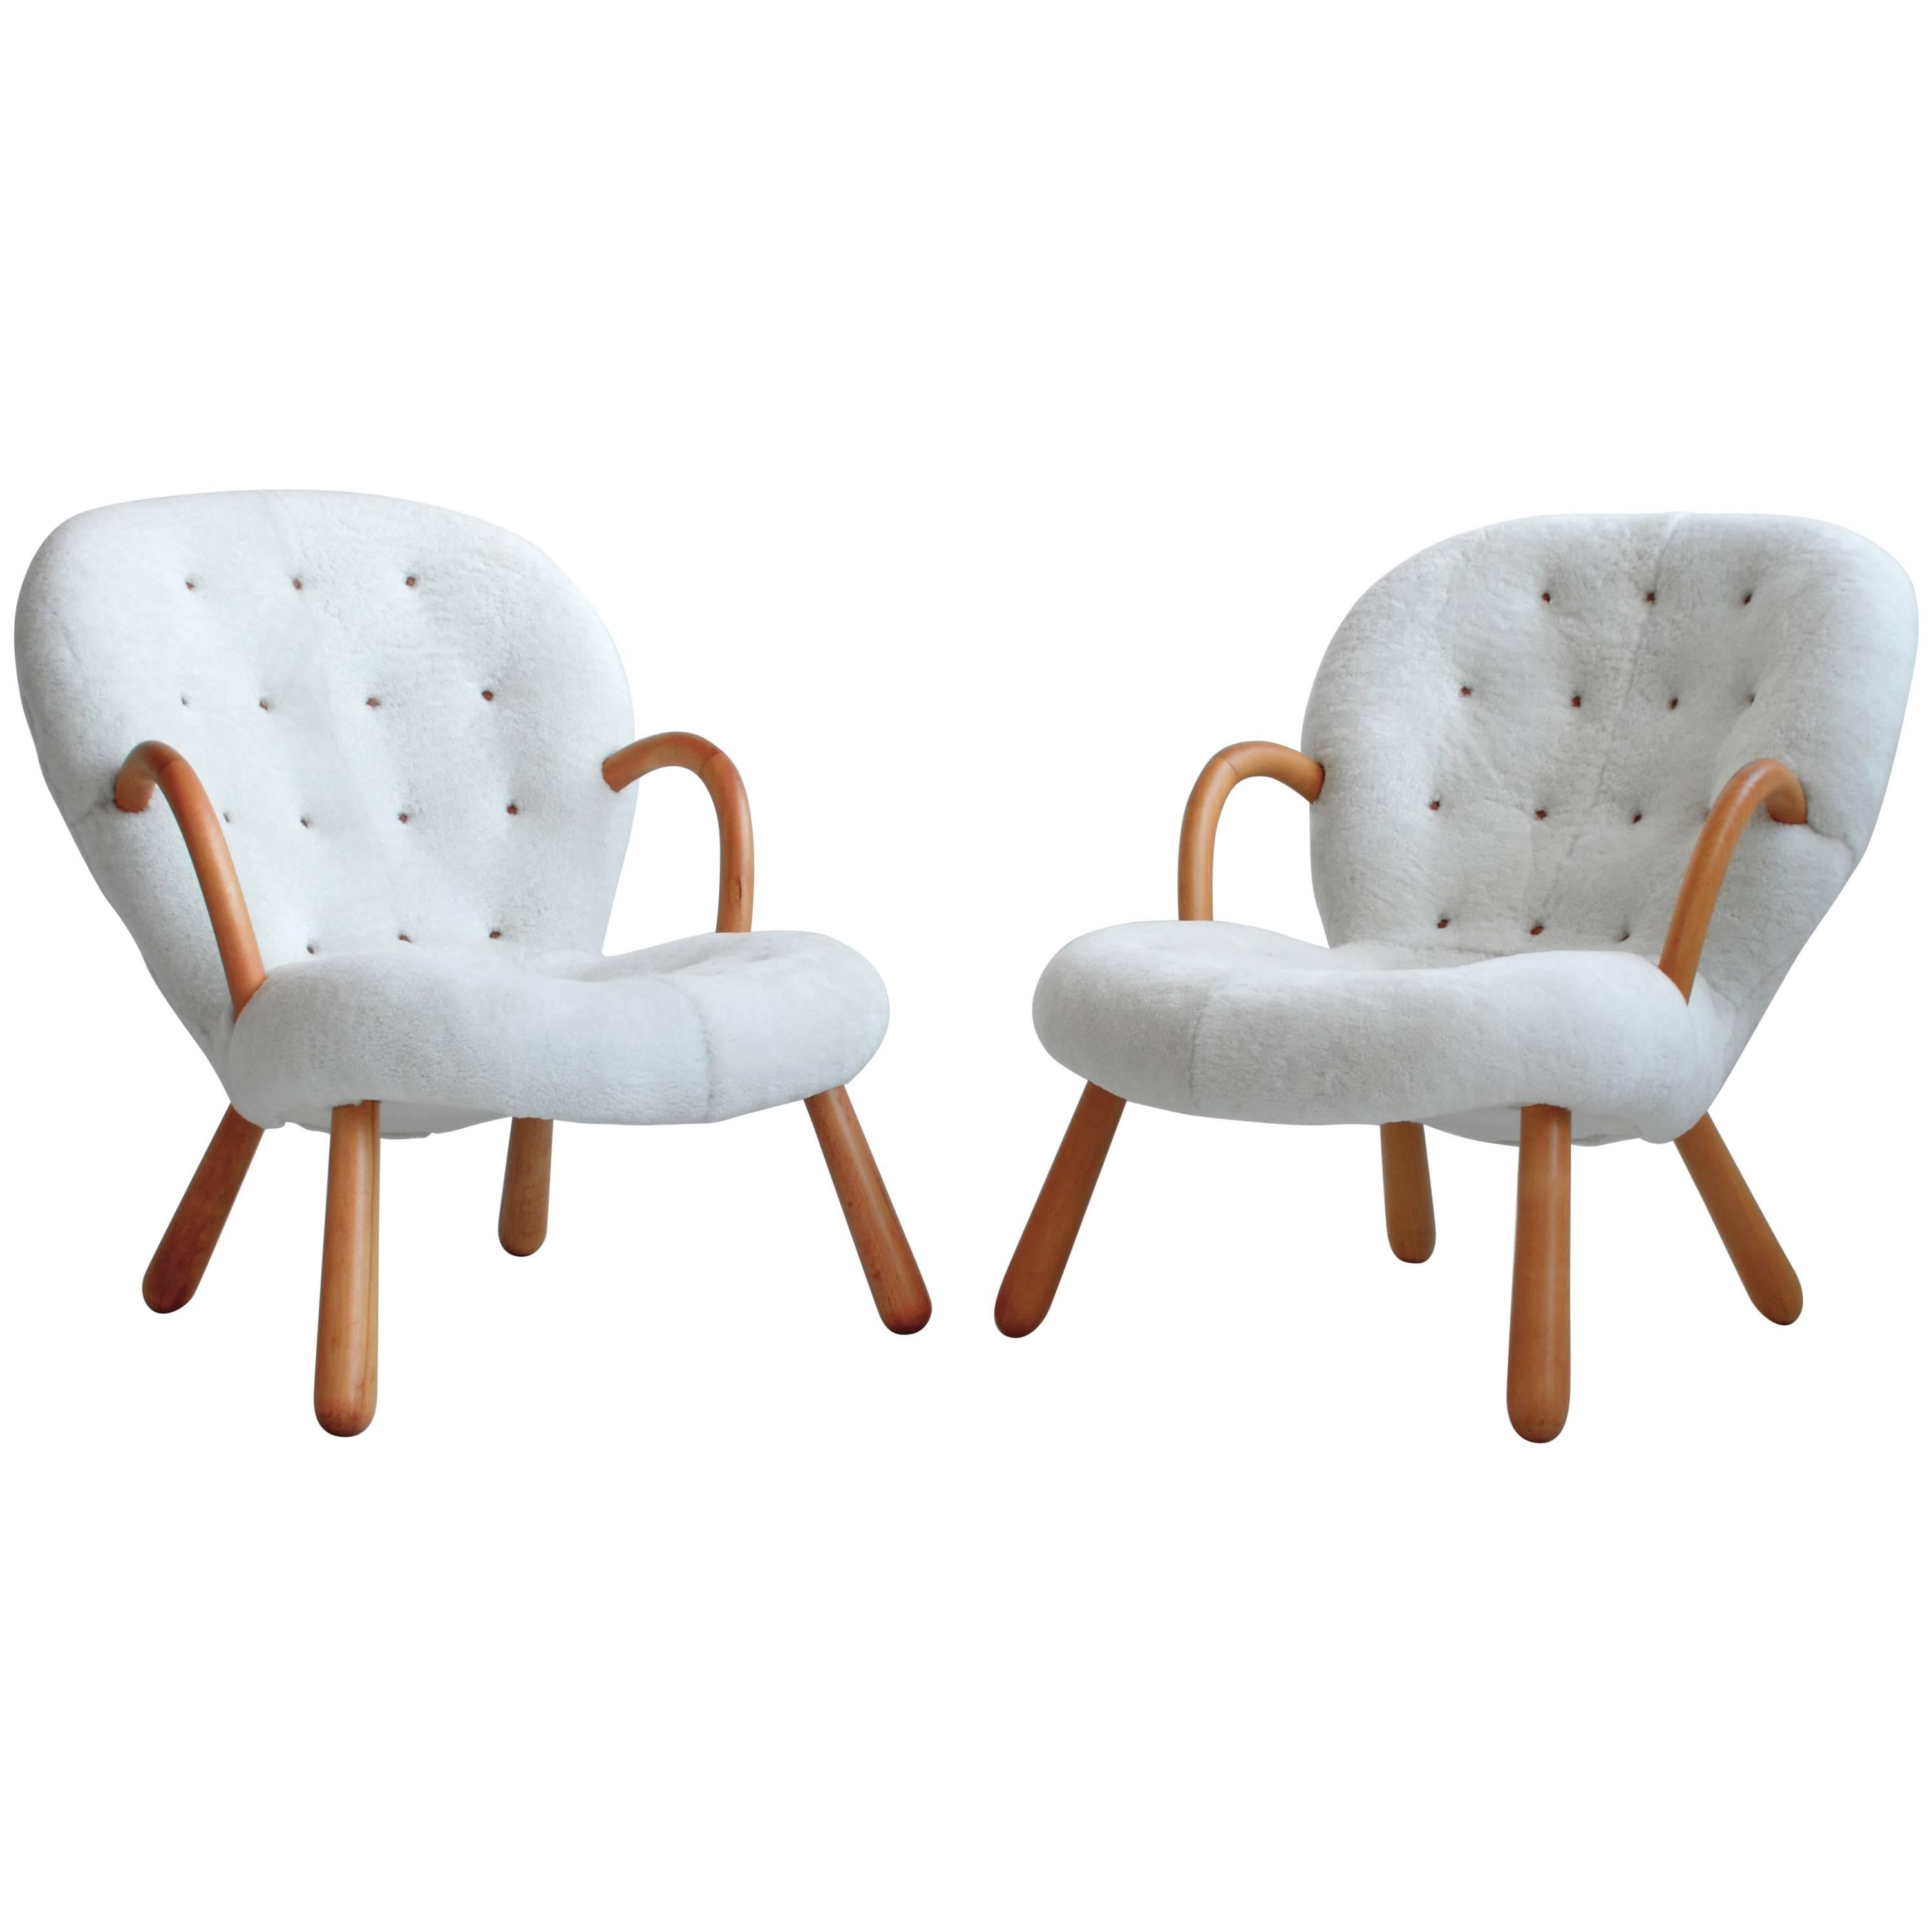 Vintage Pair of Clam Chairs by Philip Arctander in Shearling